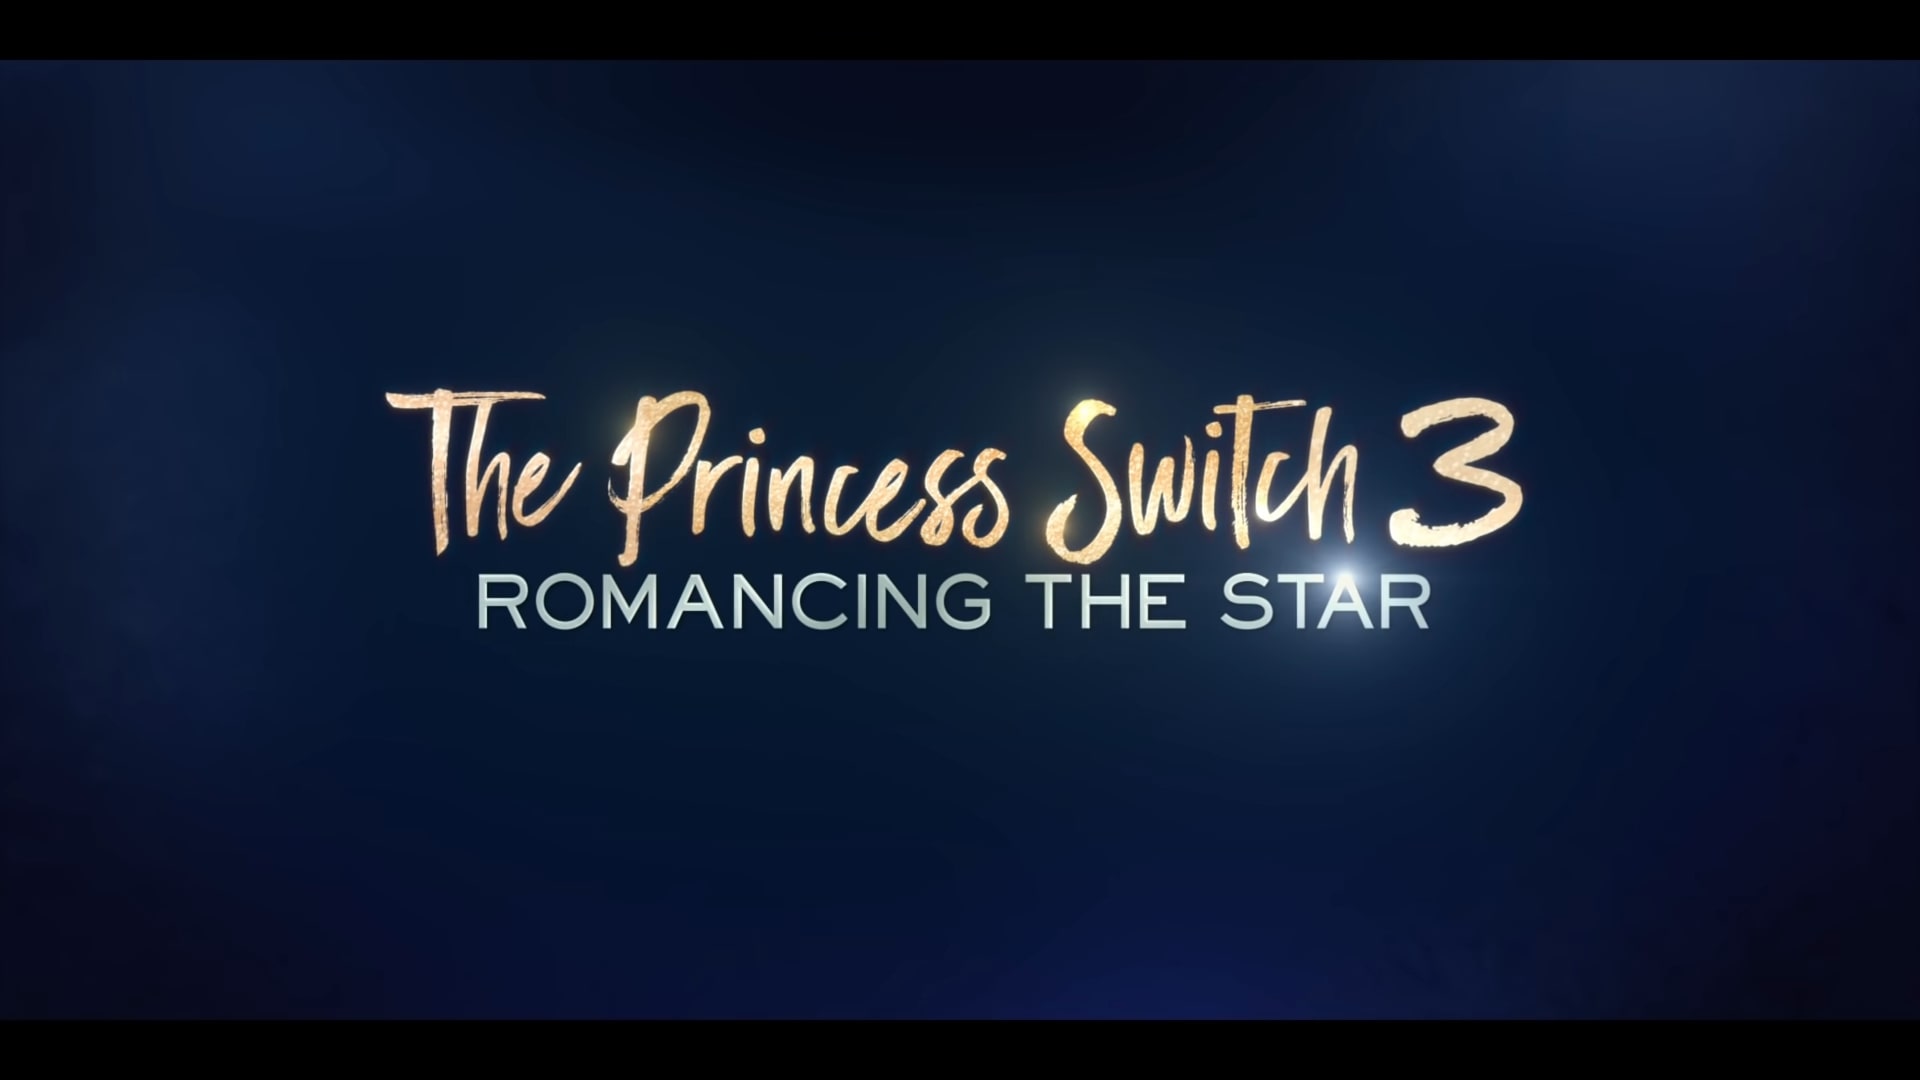 Netflix The Princess Switch 3 Romancing The Star Trailer, Coming to Netflix in November 2021